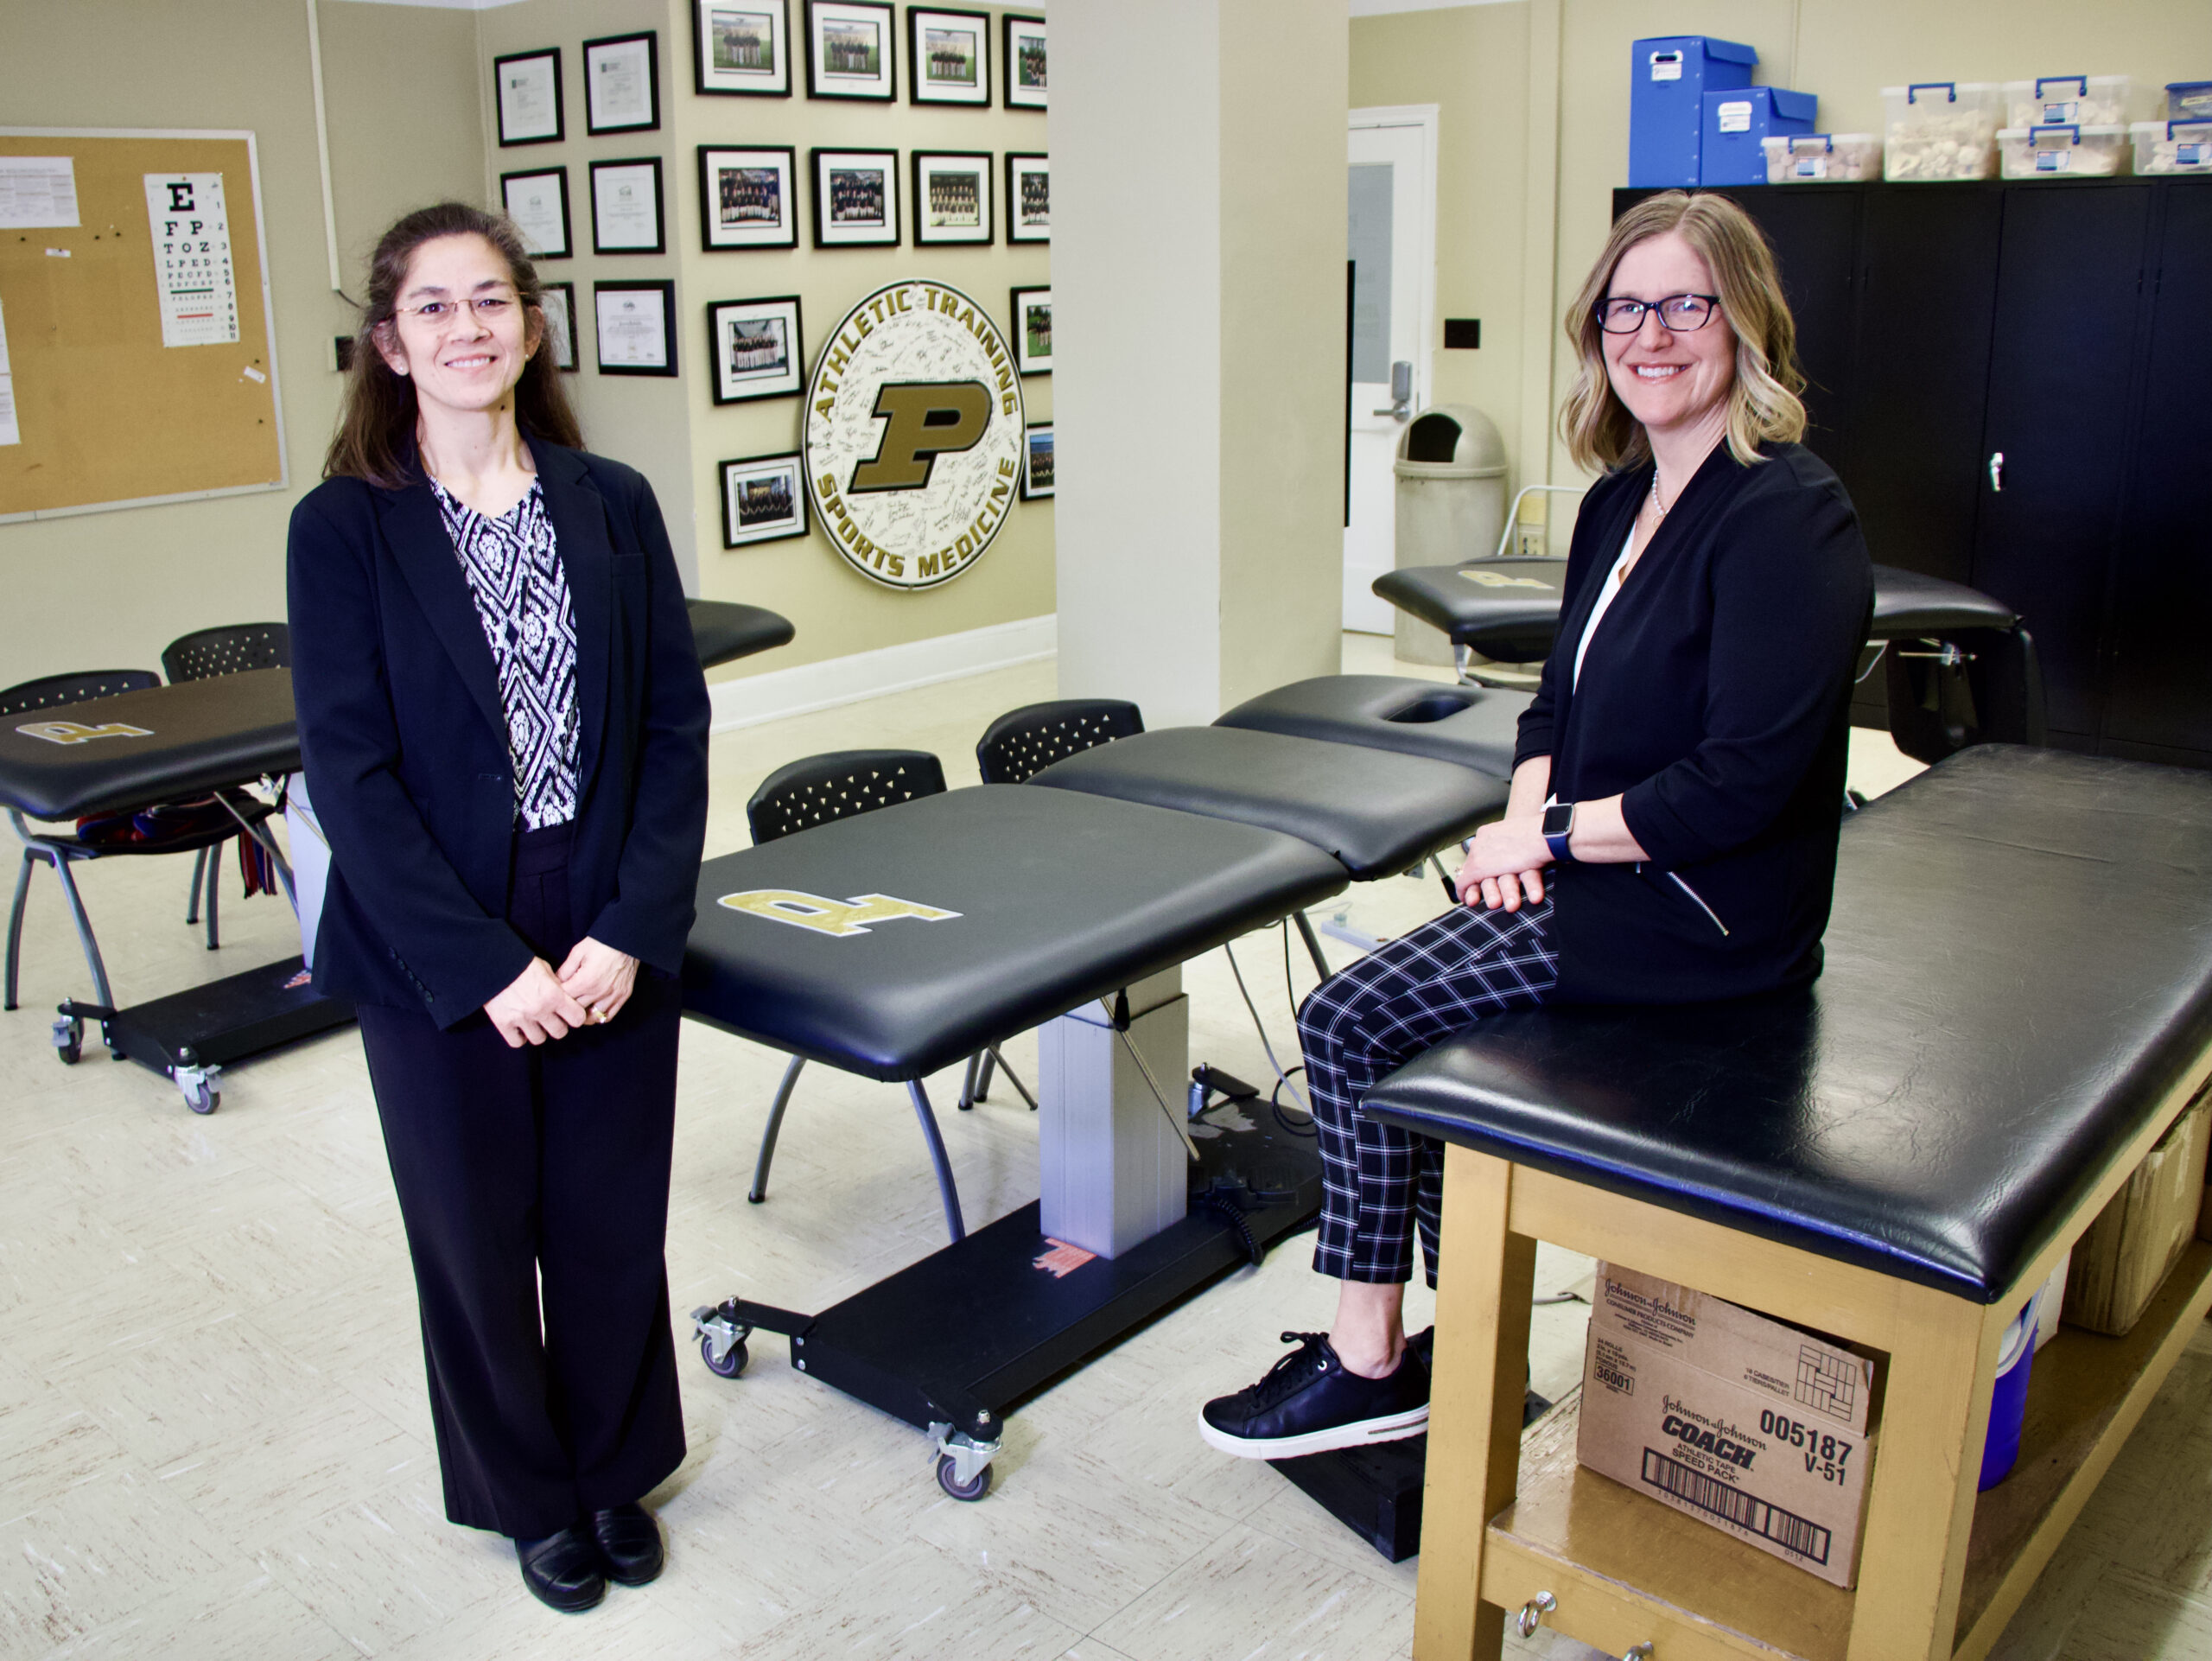 Alice Wilcoxson and Jennifer Popp pose for a picture in a health and kinesiology lab inside Lambert Fieldhouse.